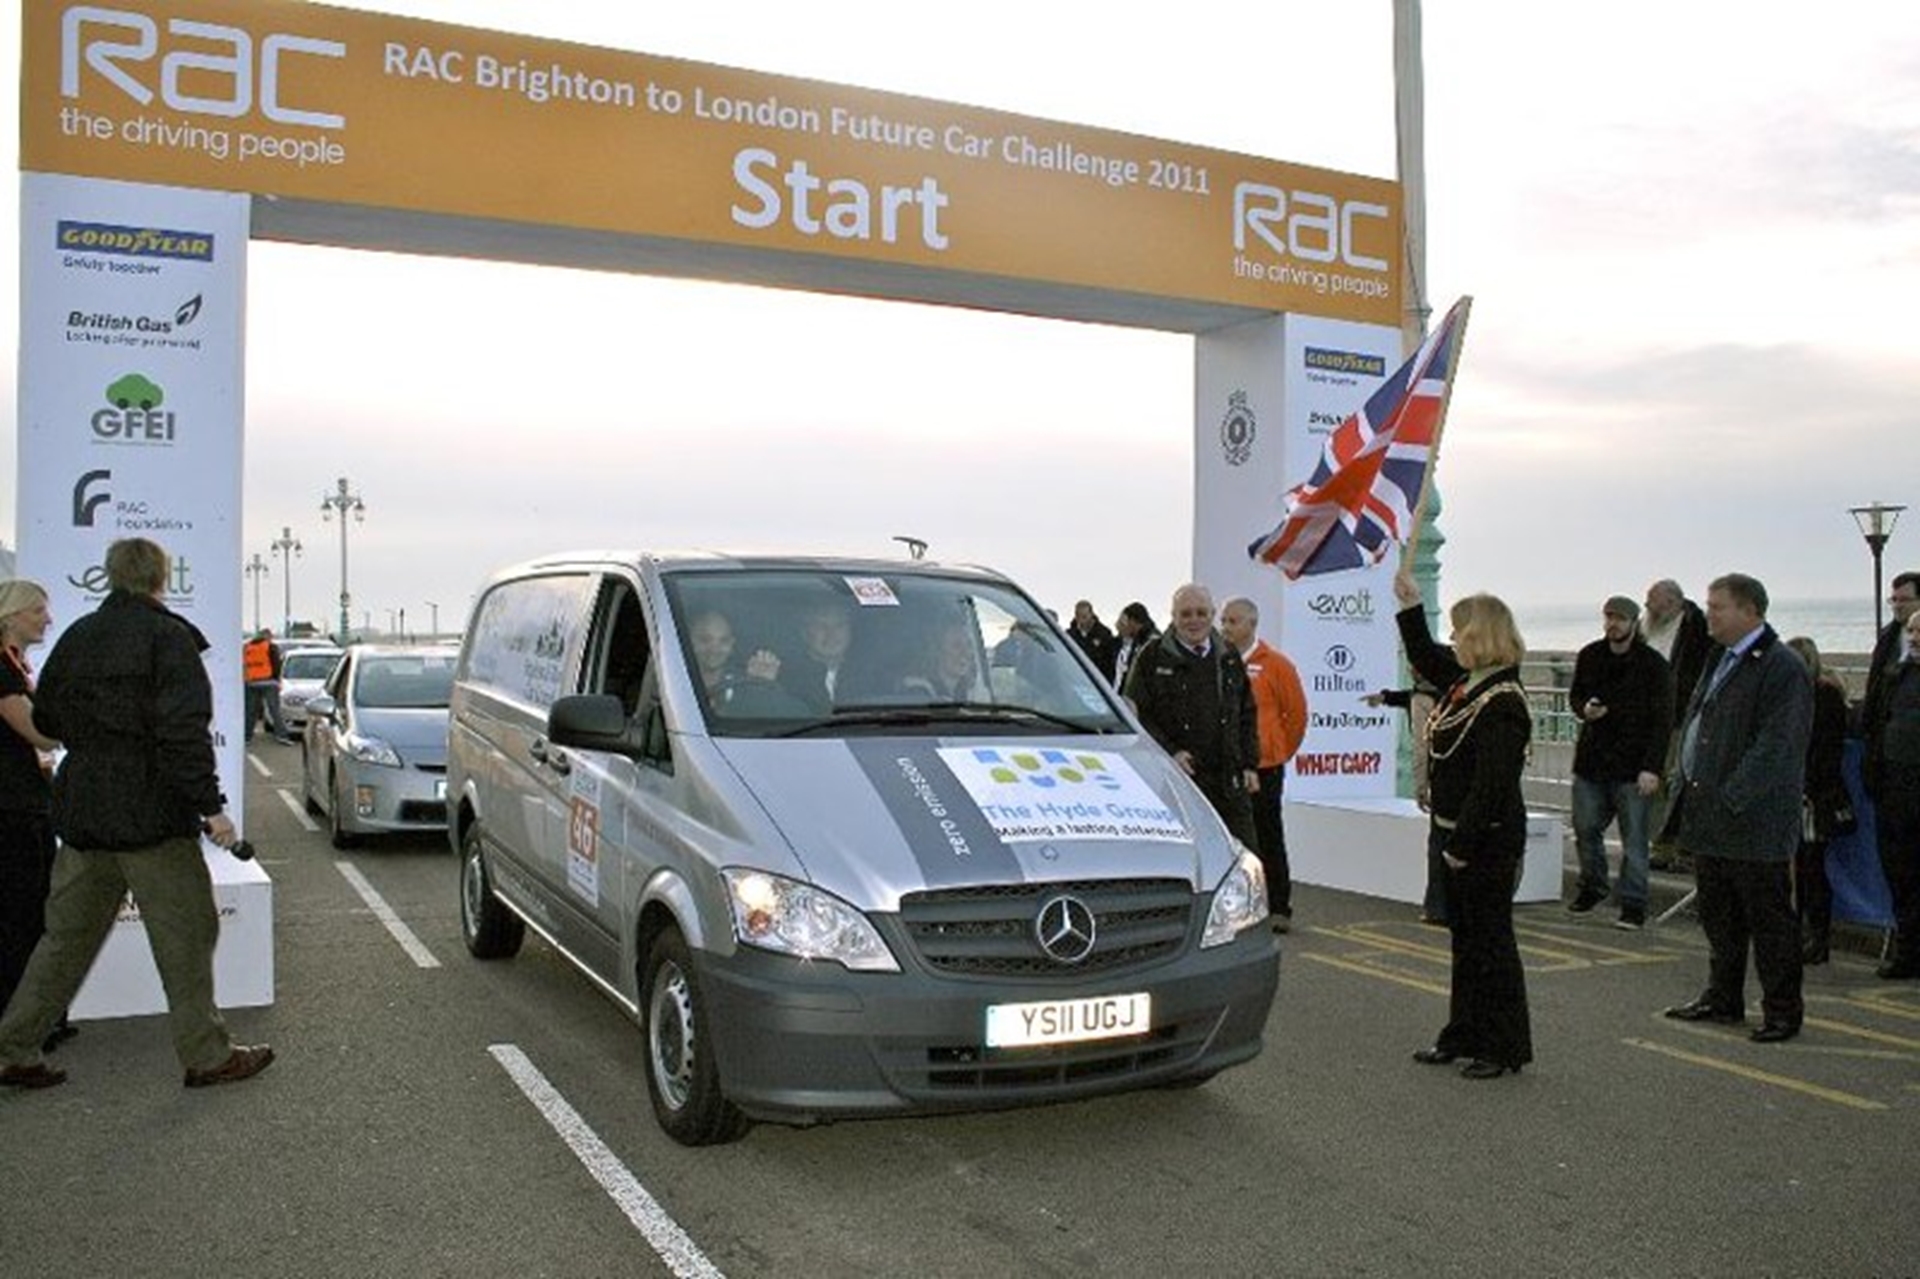 MERCEDES-BENZ VITO E-CELL CHARGES AHEAD IN THE BRIGHTON TO LONDON FUTURE VEHICLE CHALLENGE